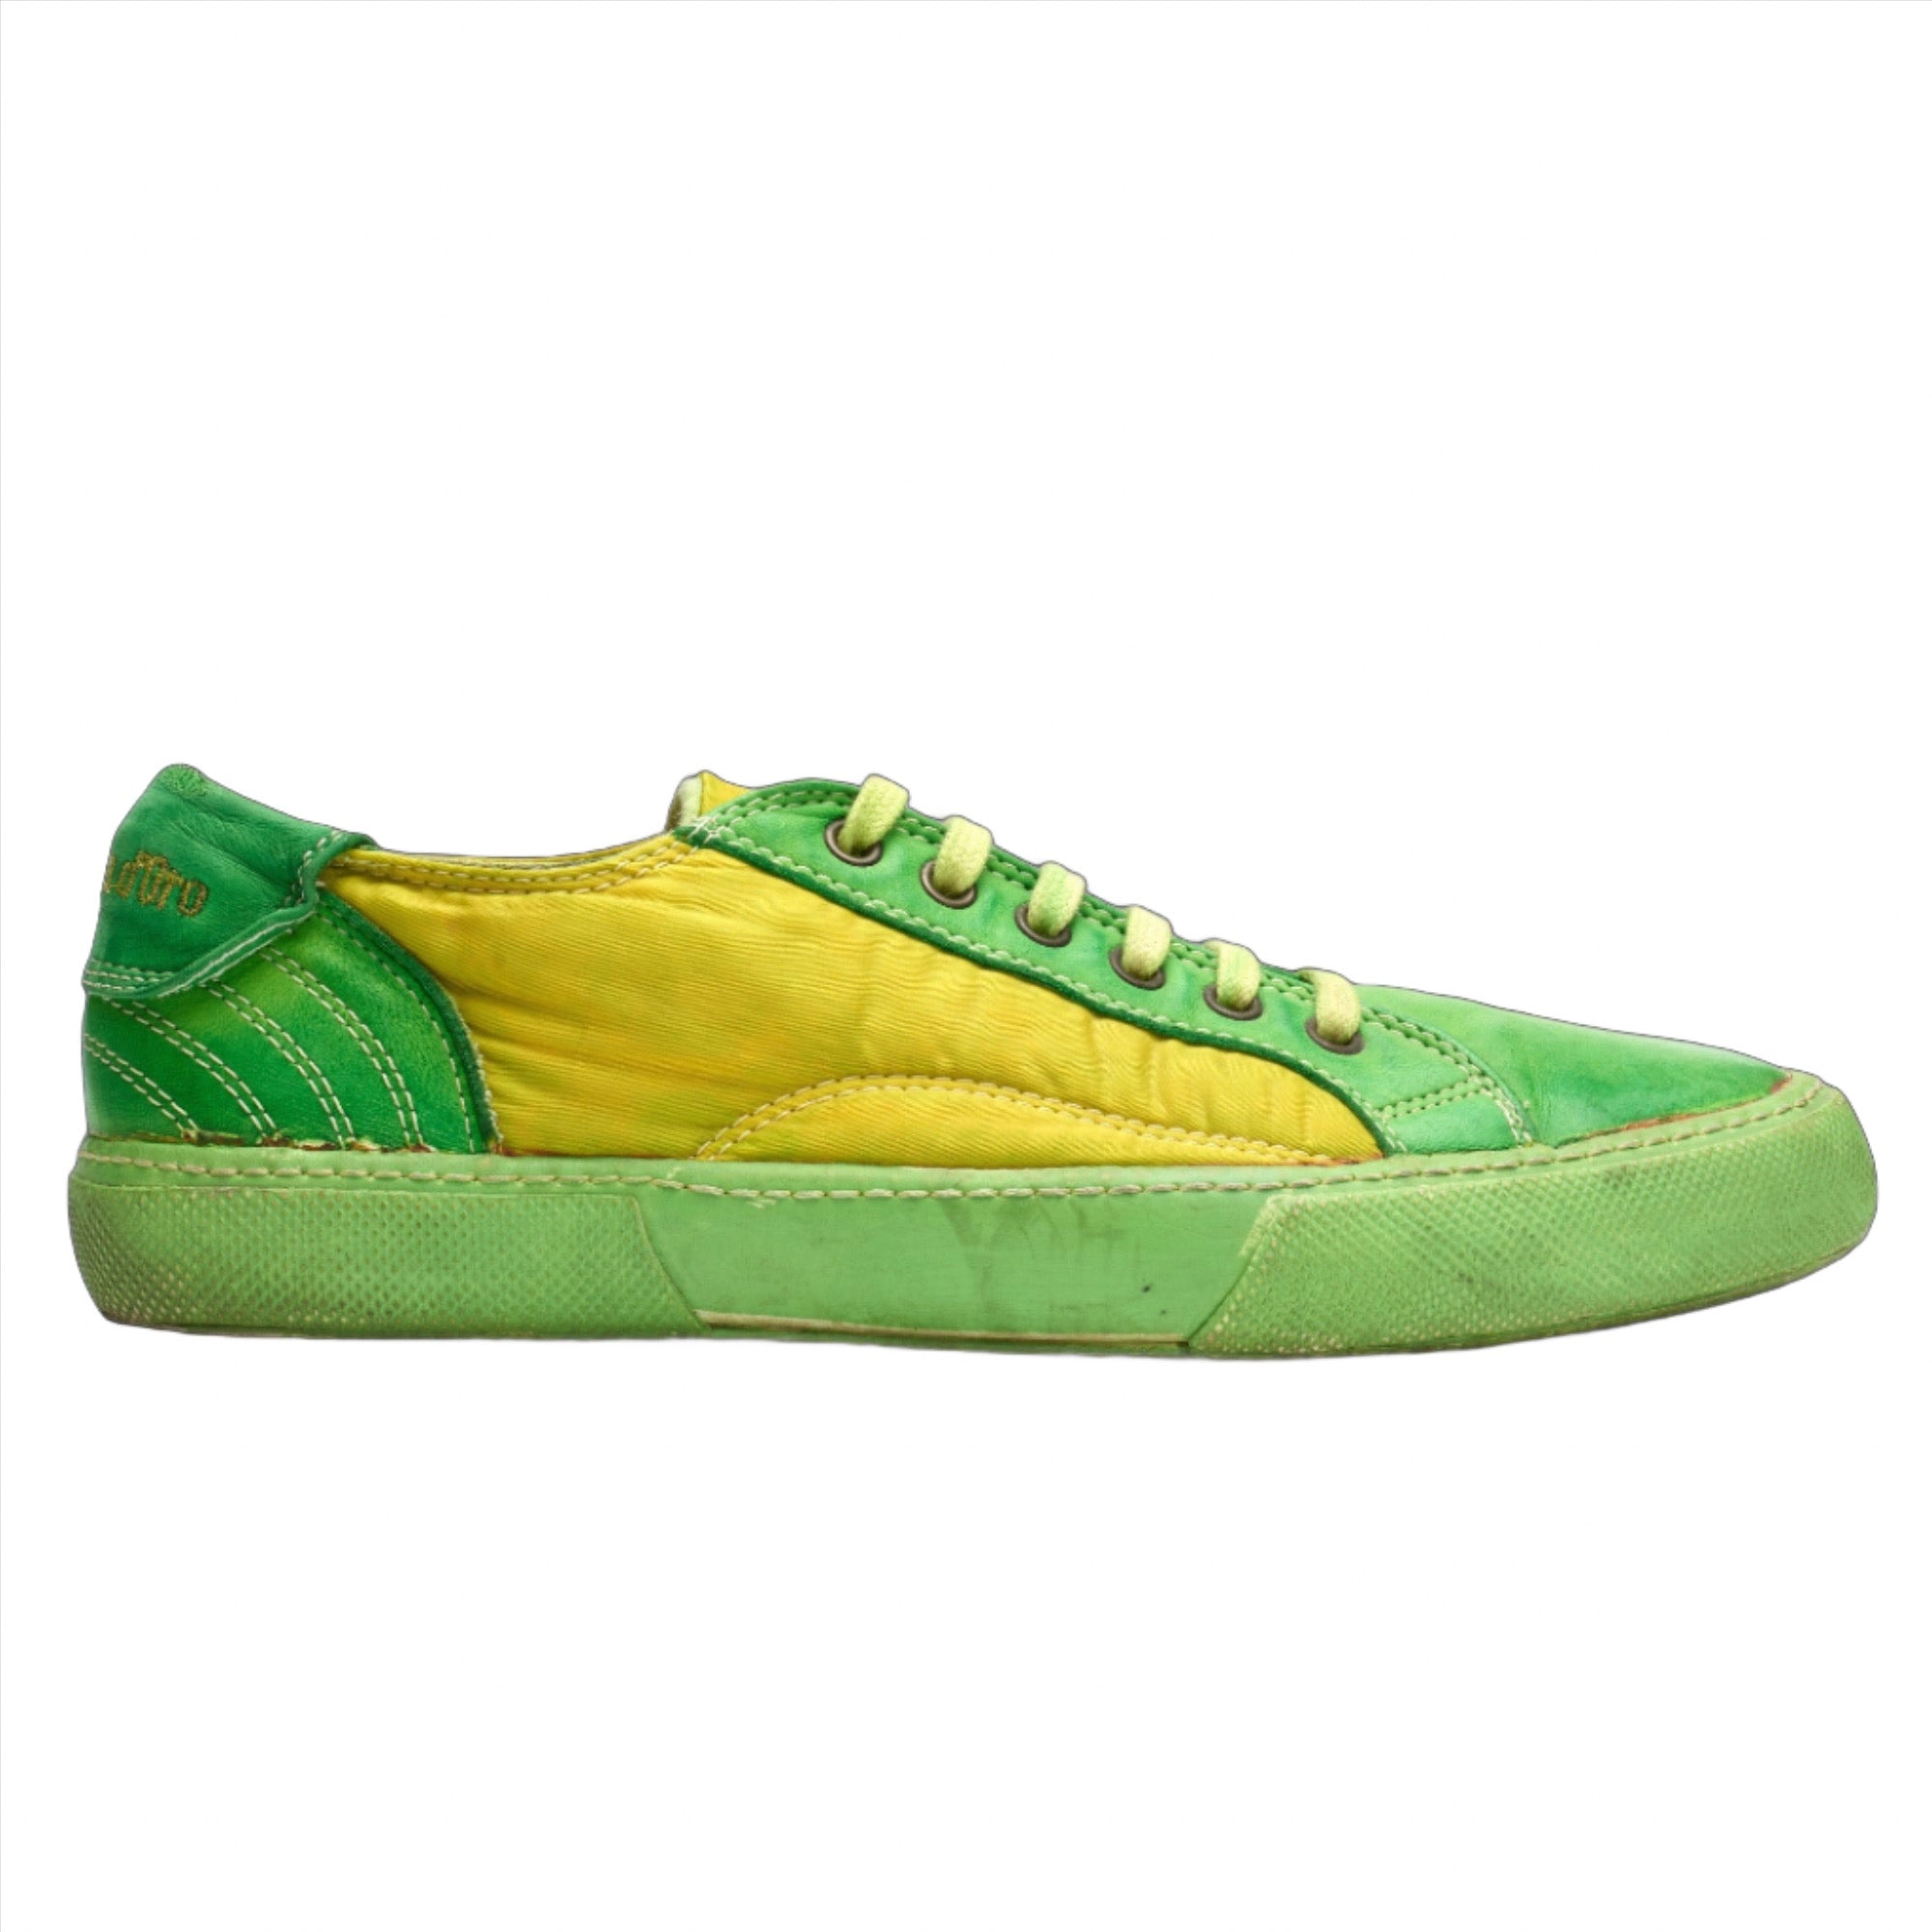 PANTOFOLA D'ORO Super Star Extra Green Leather Low Top Sneakers Shoes EU 43 US 10 PANTOFOLA D'ORO